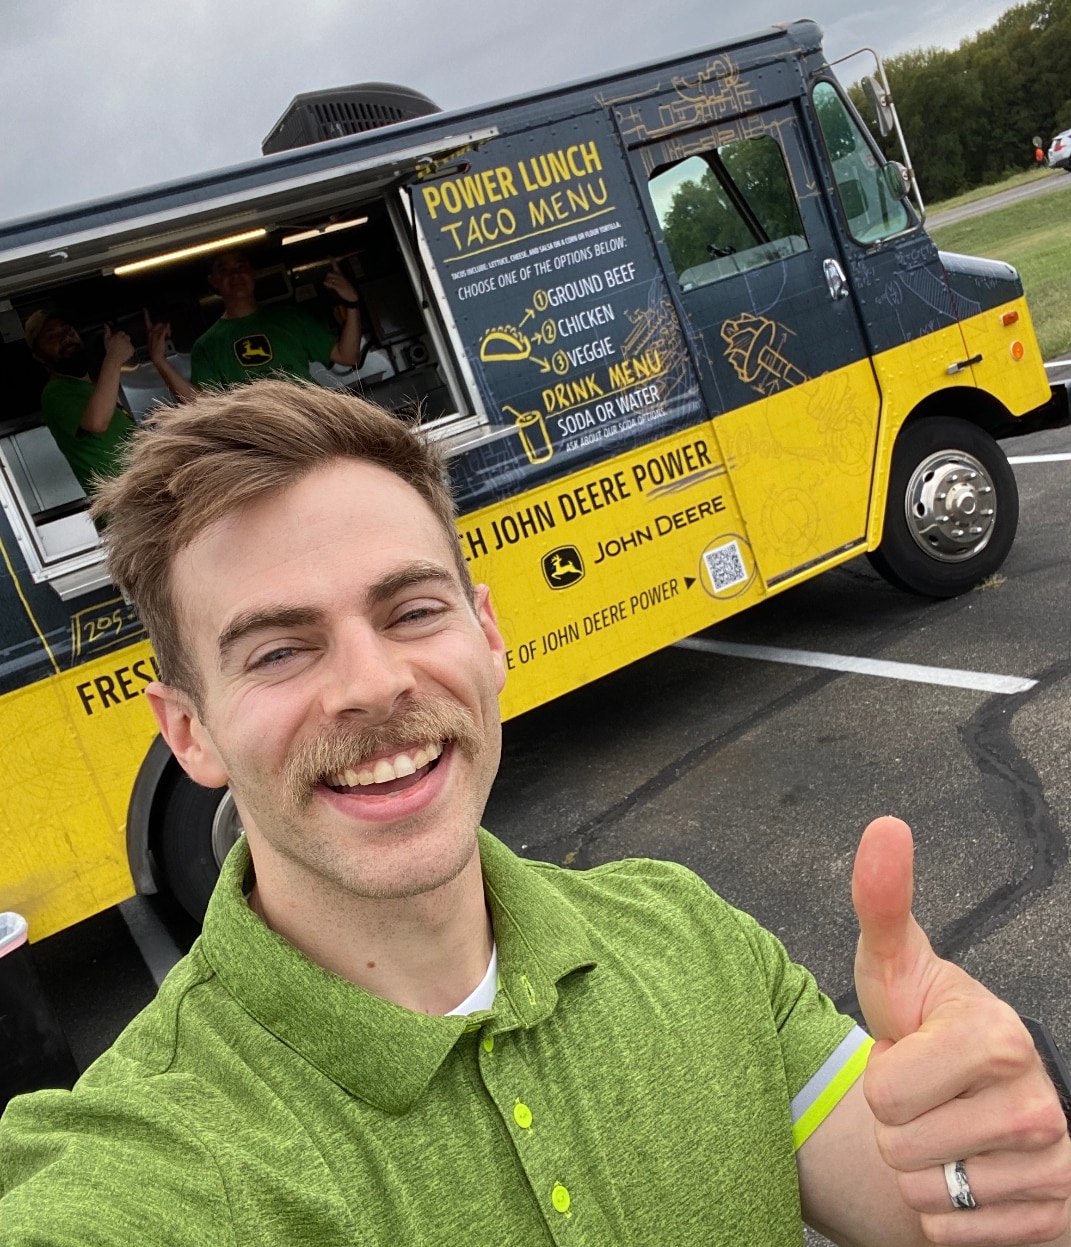 man smiling in front of the taco truck giving a thumbs up